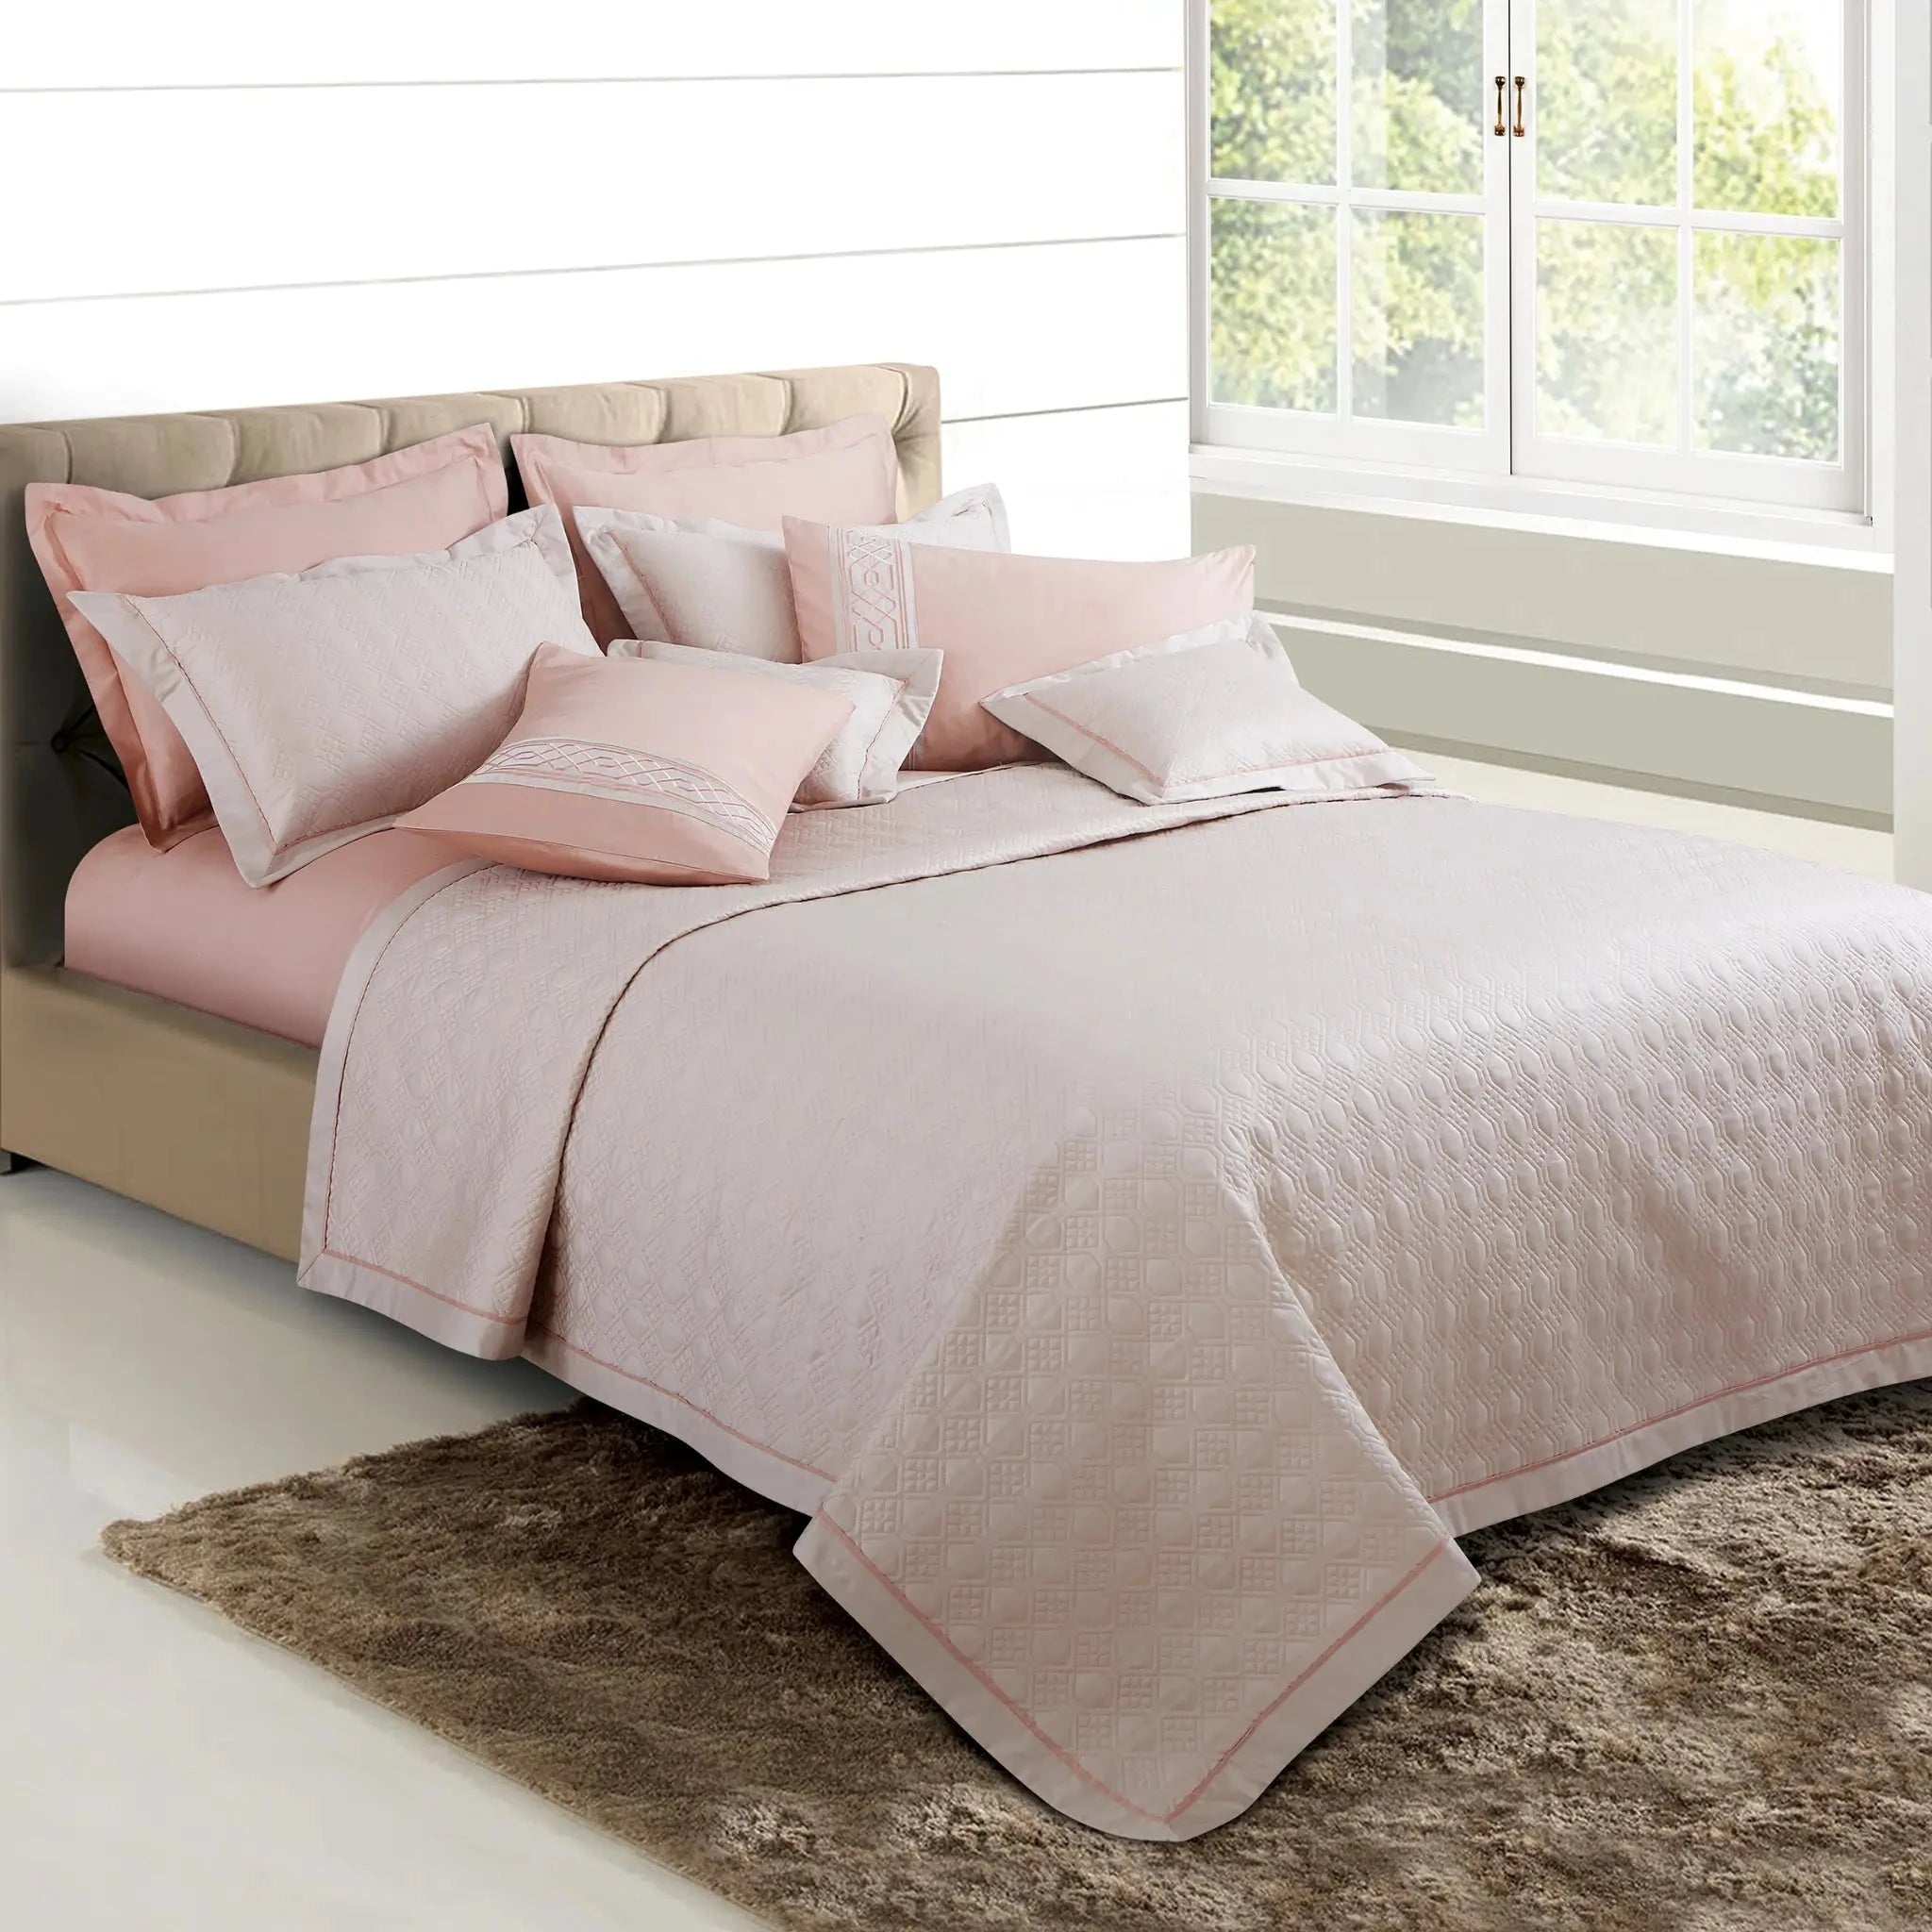 Malako Kairo 500 TC Almond Beige/Peach Solid King Size 100% Cotton Quilted Bed Cover/Embroidered Bed Sheet Set - MALAKO